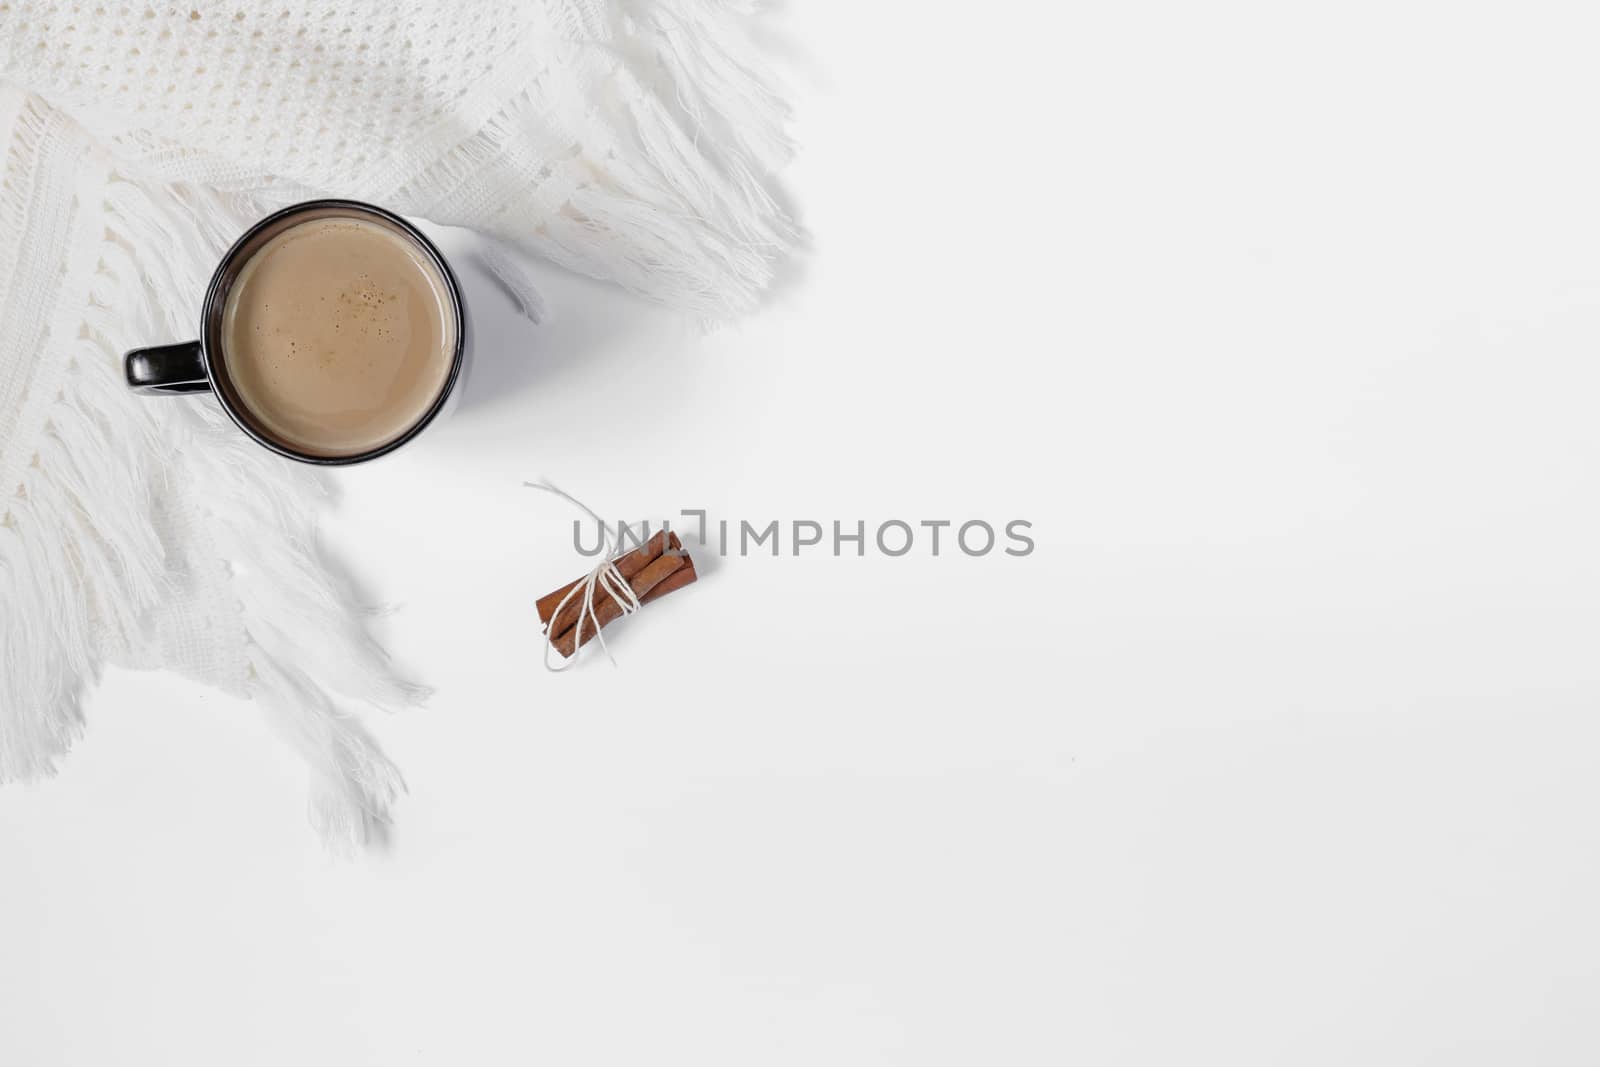 Black cup of white coffee with cinnamon and white crocheted scarf on a white background. View from above.